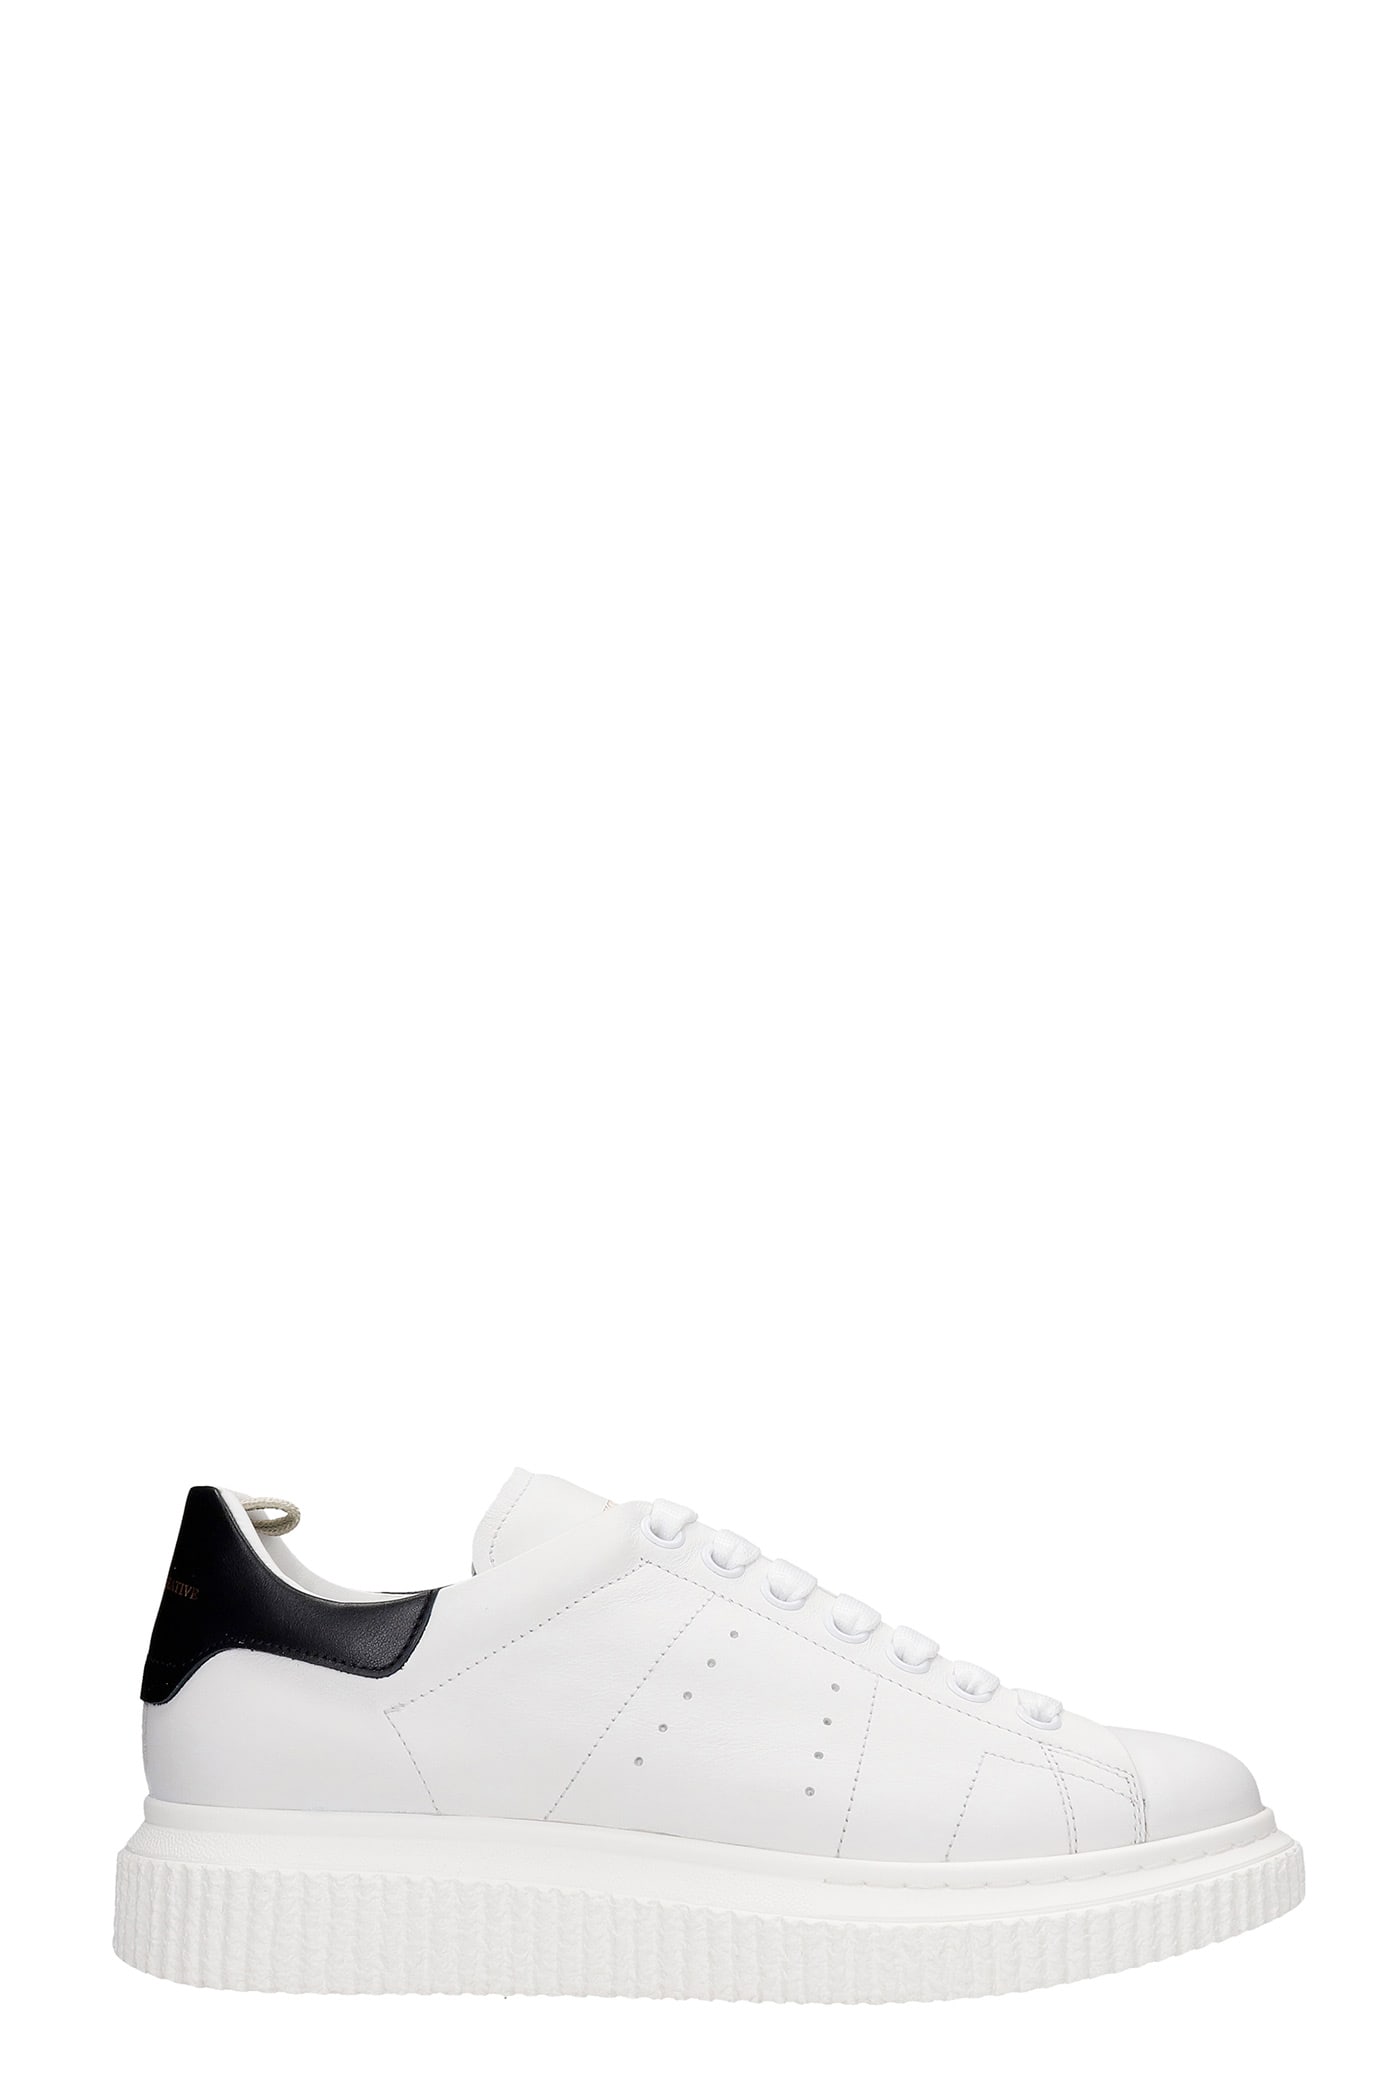 Officine Creative Krace 015 Sneakers In White Leather